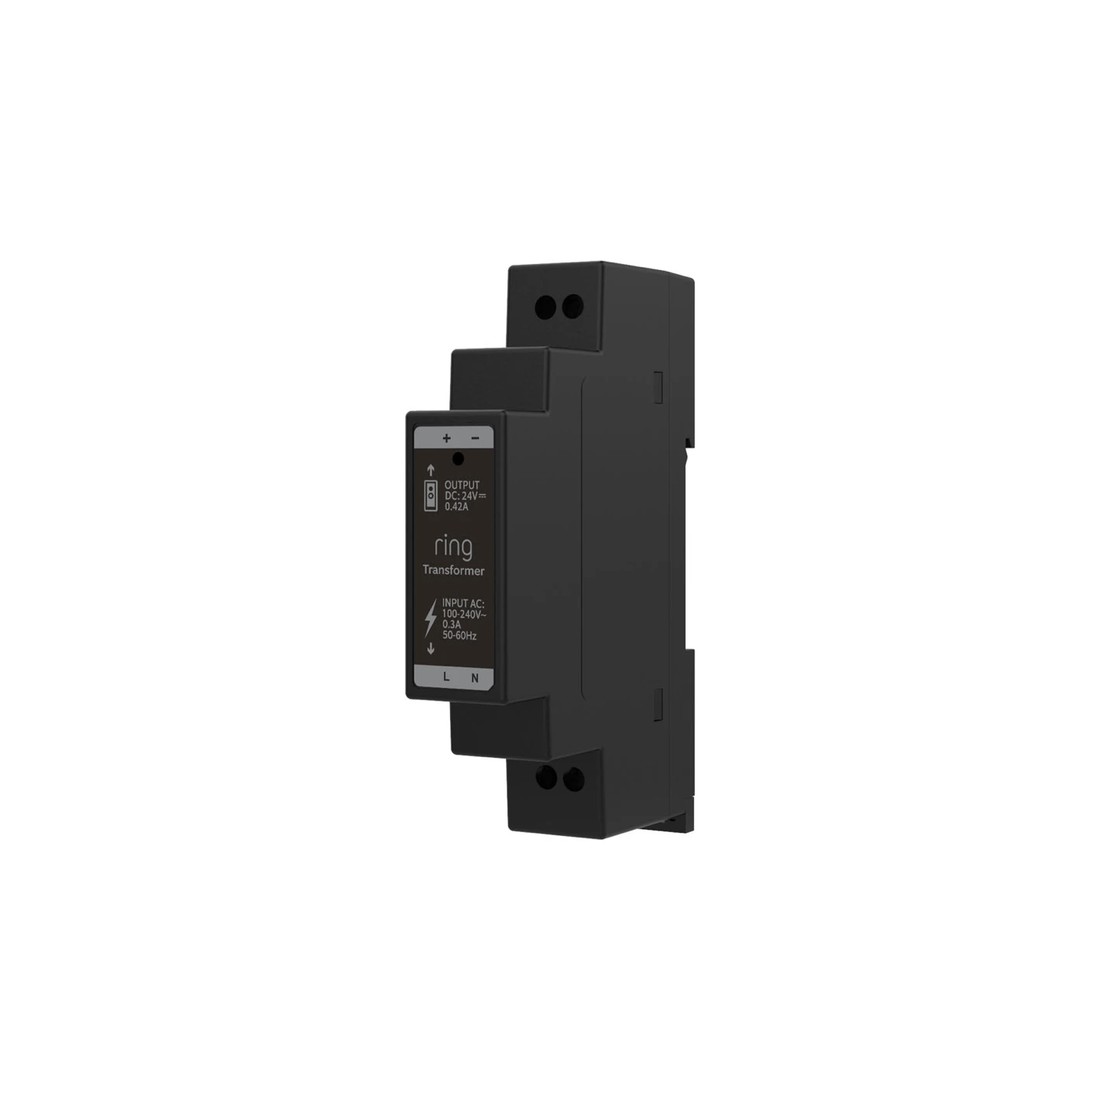 Ring DIN Rail Transformer for Wired Video Doorbells